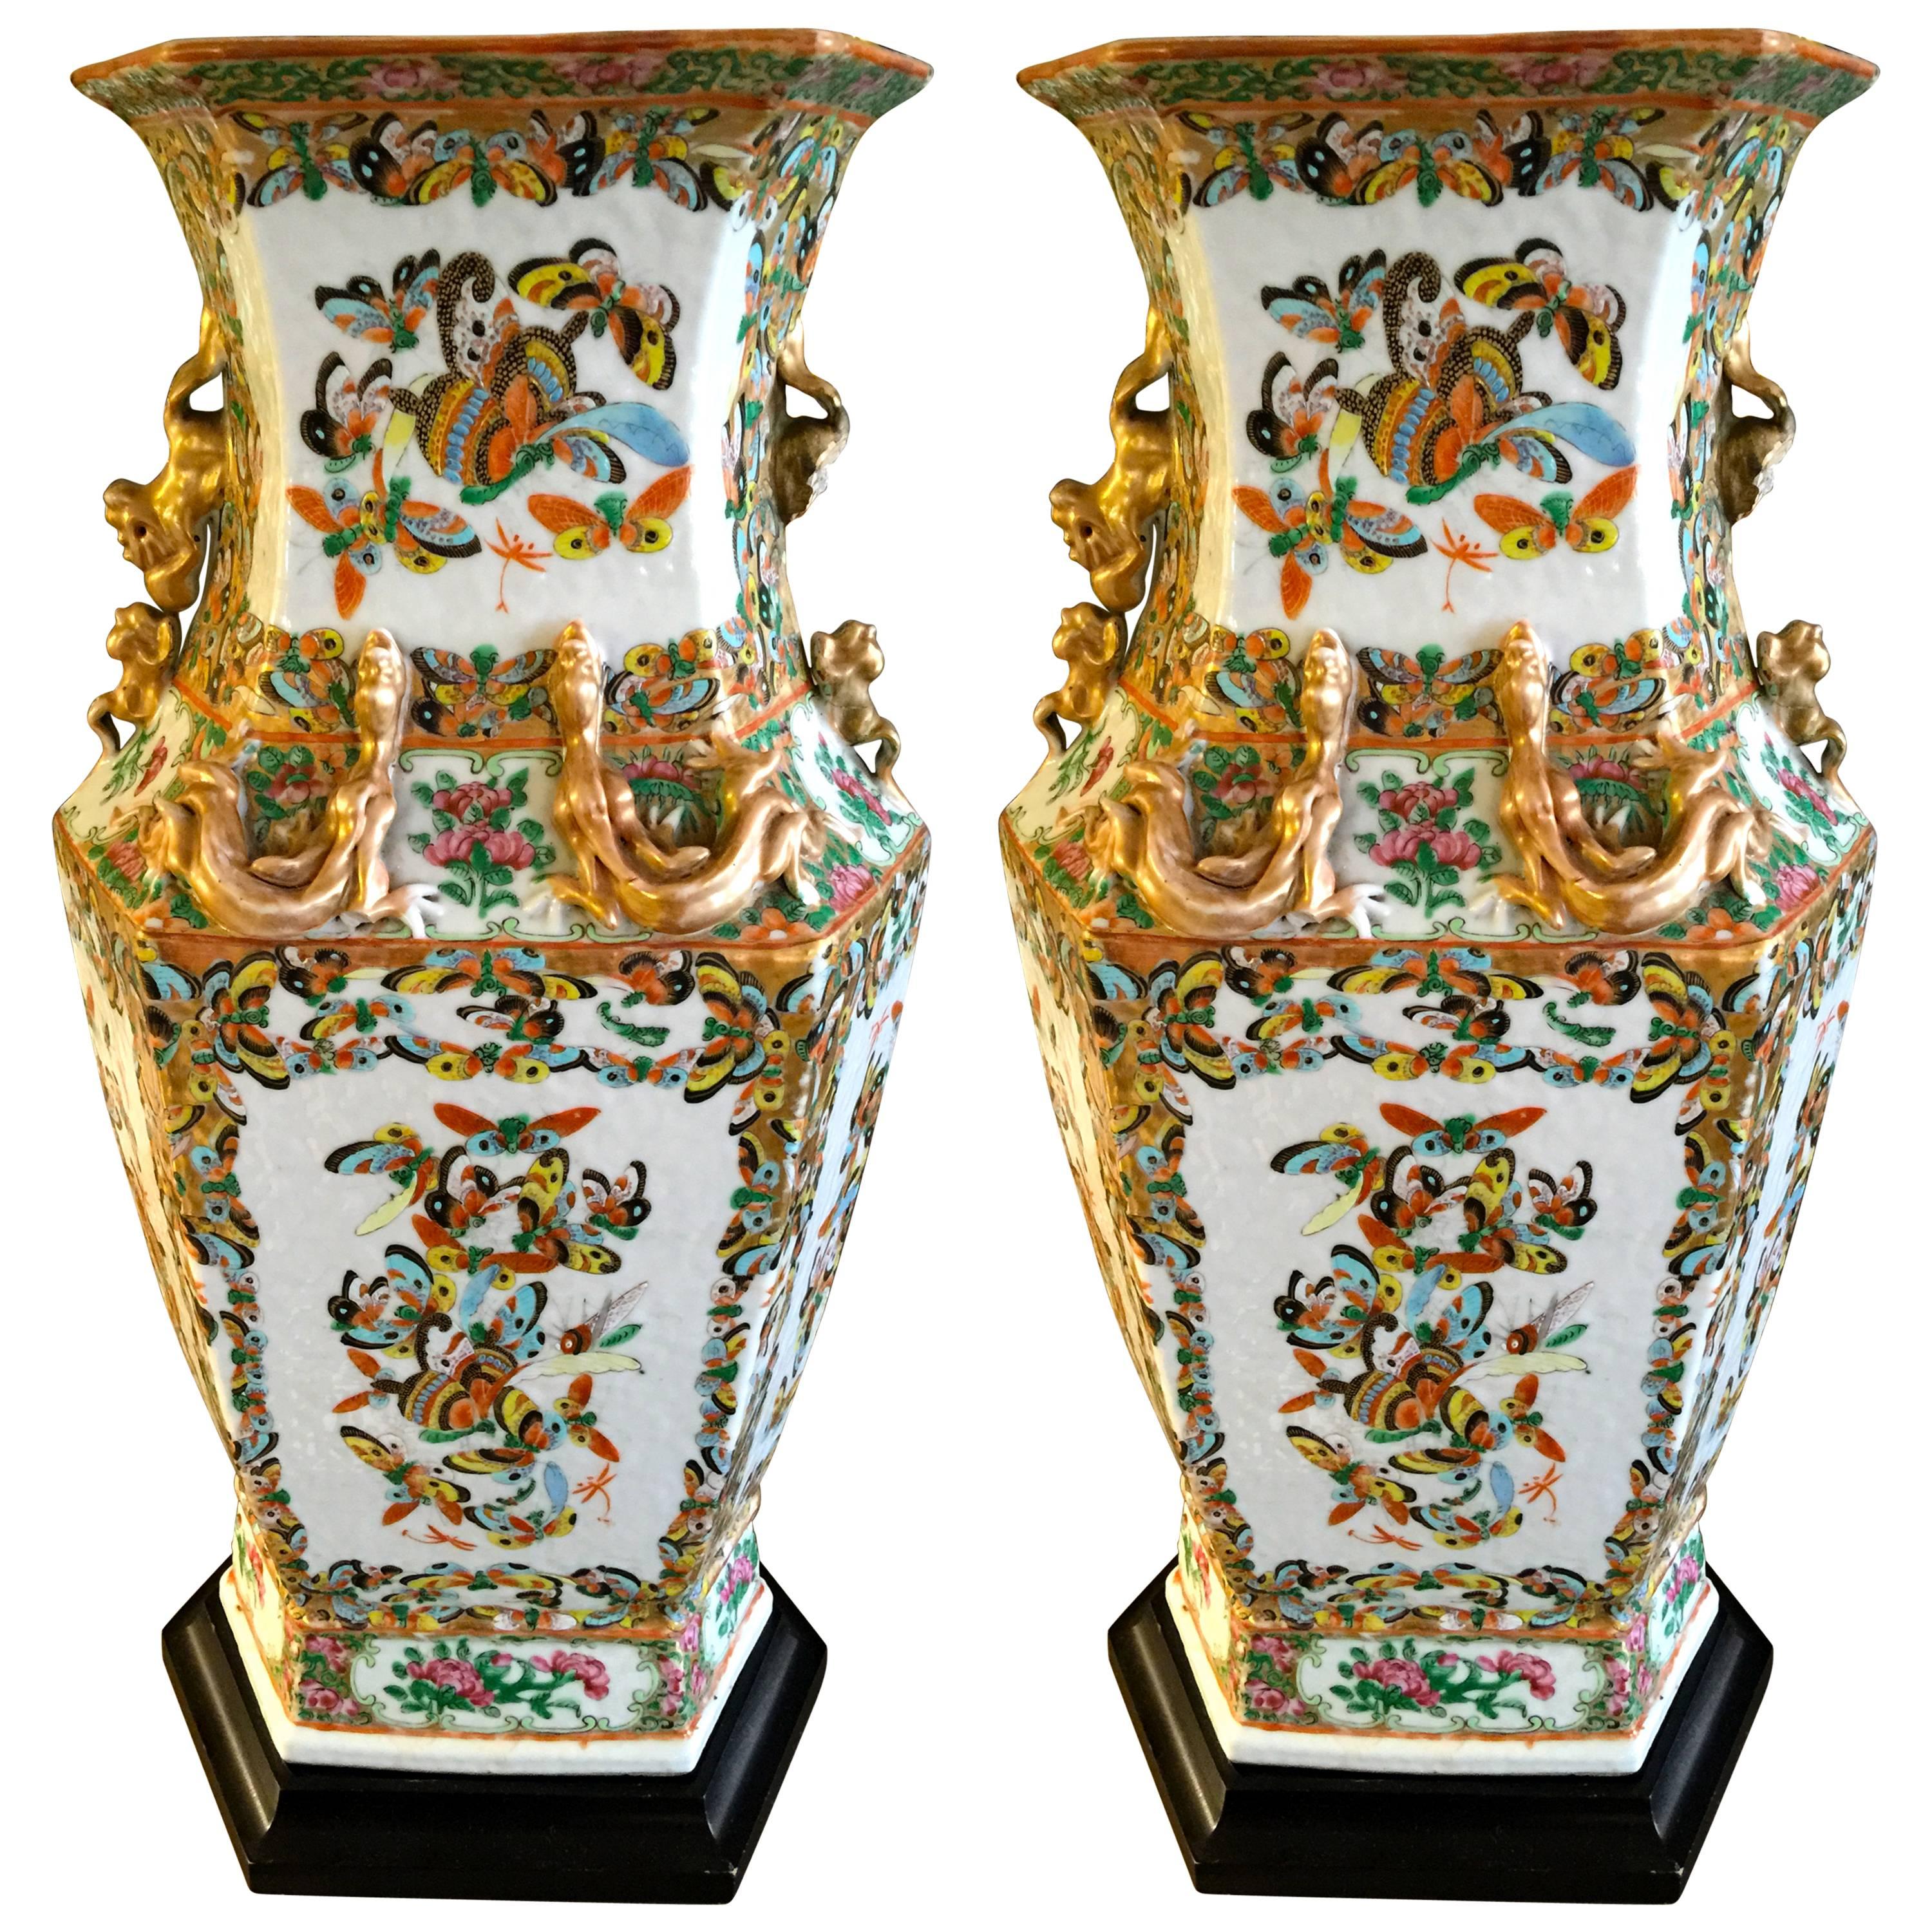 Pair of 18th Century Chinese Vases as Lamps